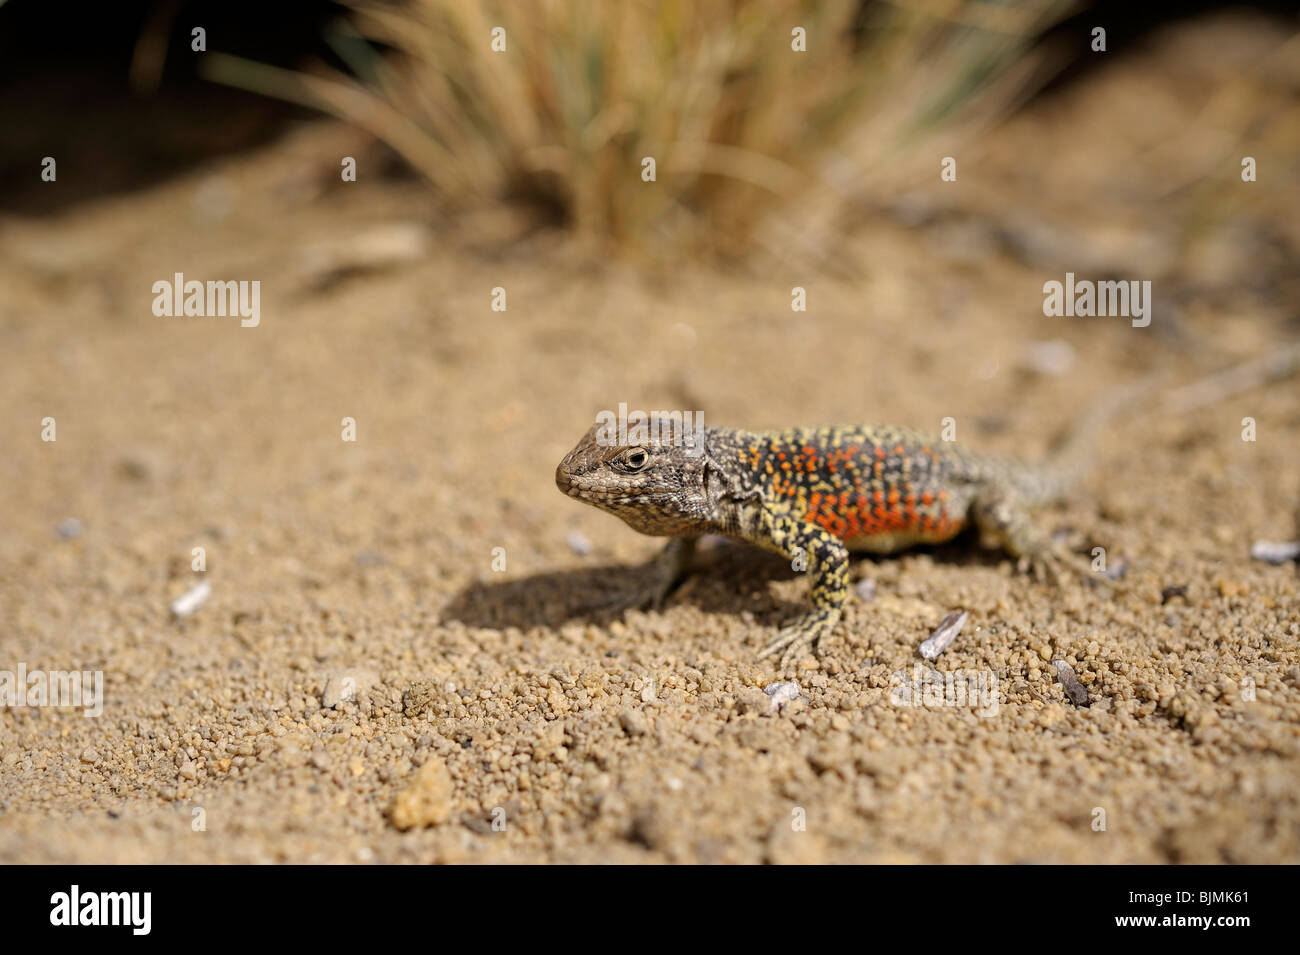 Patagonian lizard (Lacertidae) in the sand, El Chalten, Patagonia, Argentina, South America Stock Photo